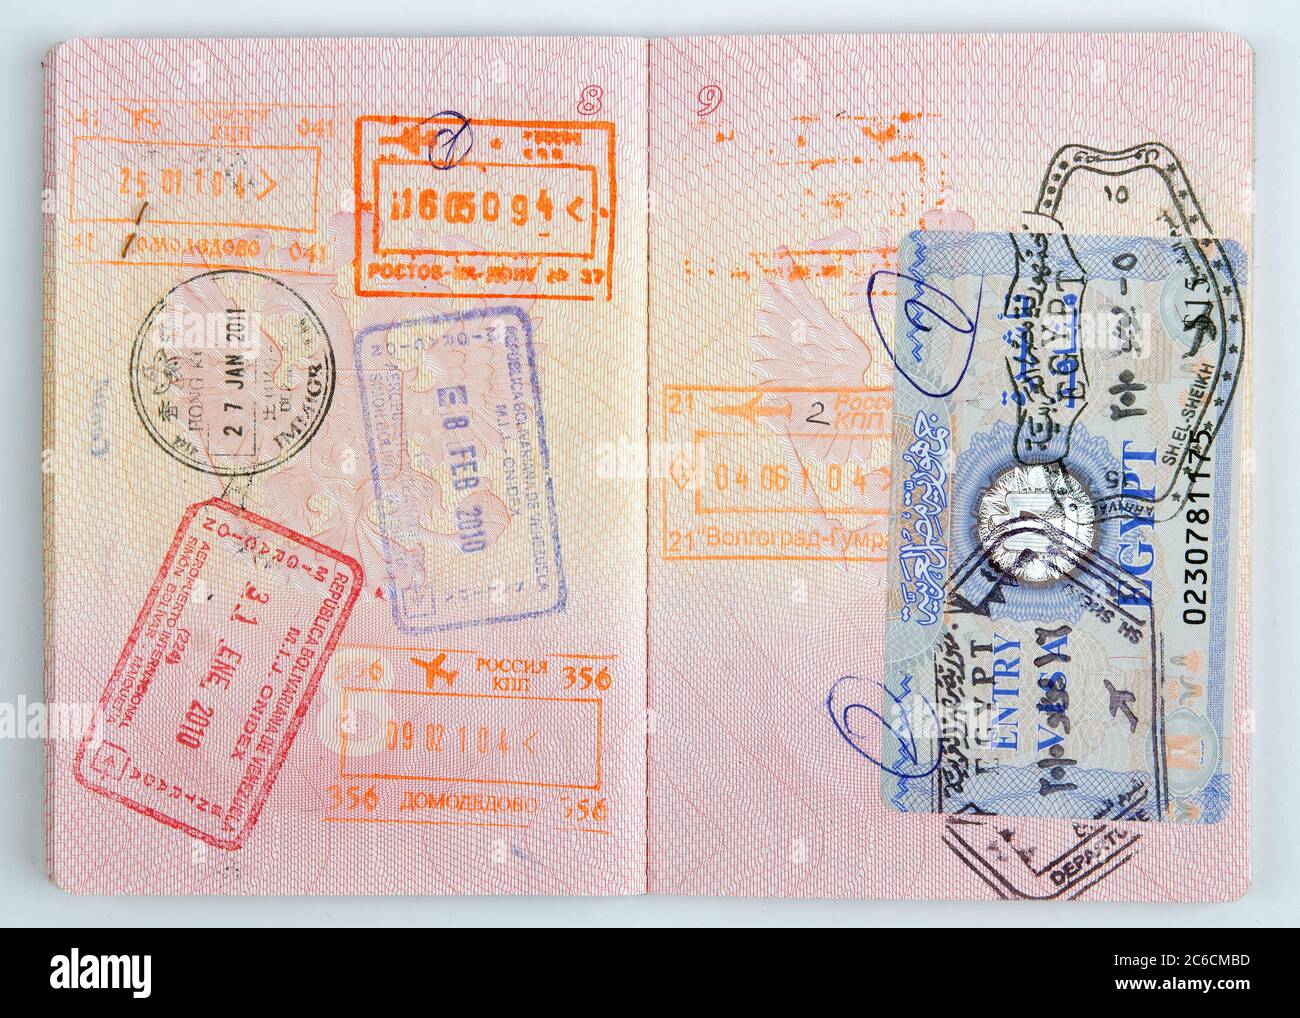 Russian passport with egyptian visa and stamps on the border of different countries Stock Photo